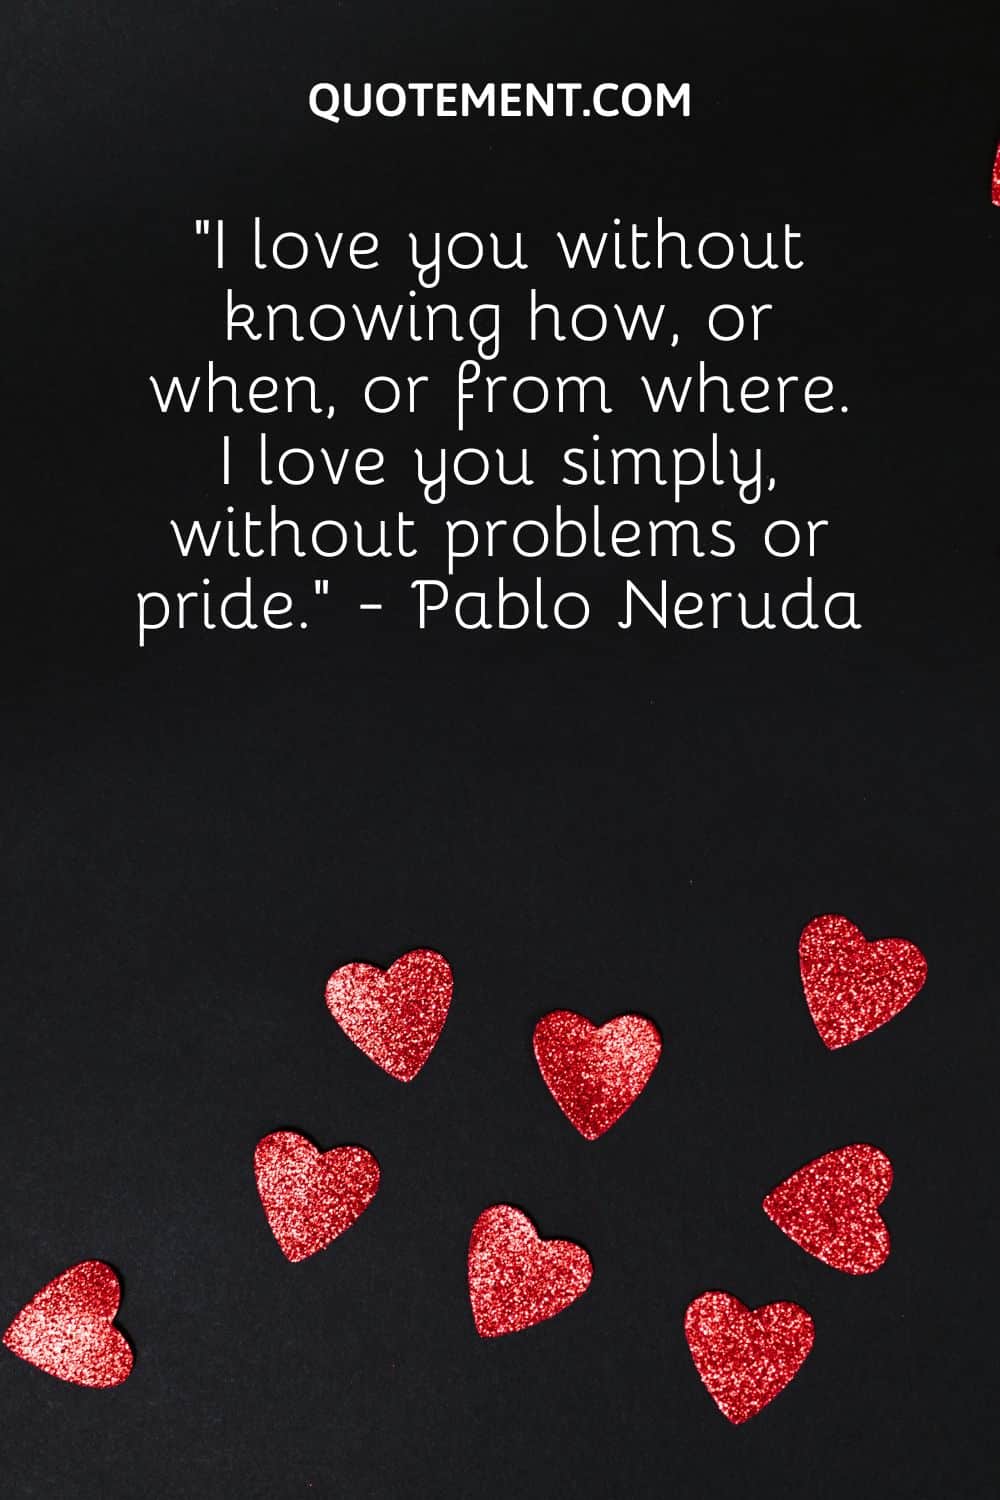 “I love you without knowing how, or when, or from where. I love you simply, without problems or pride.” - Pablo Neruda